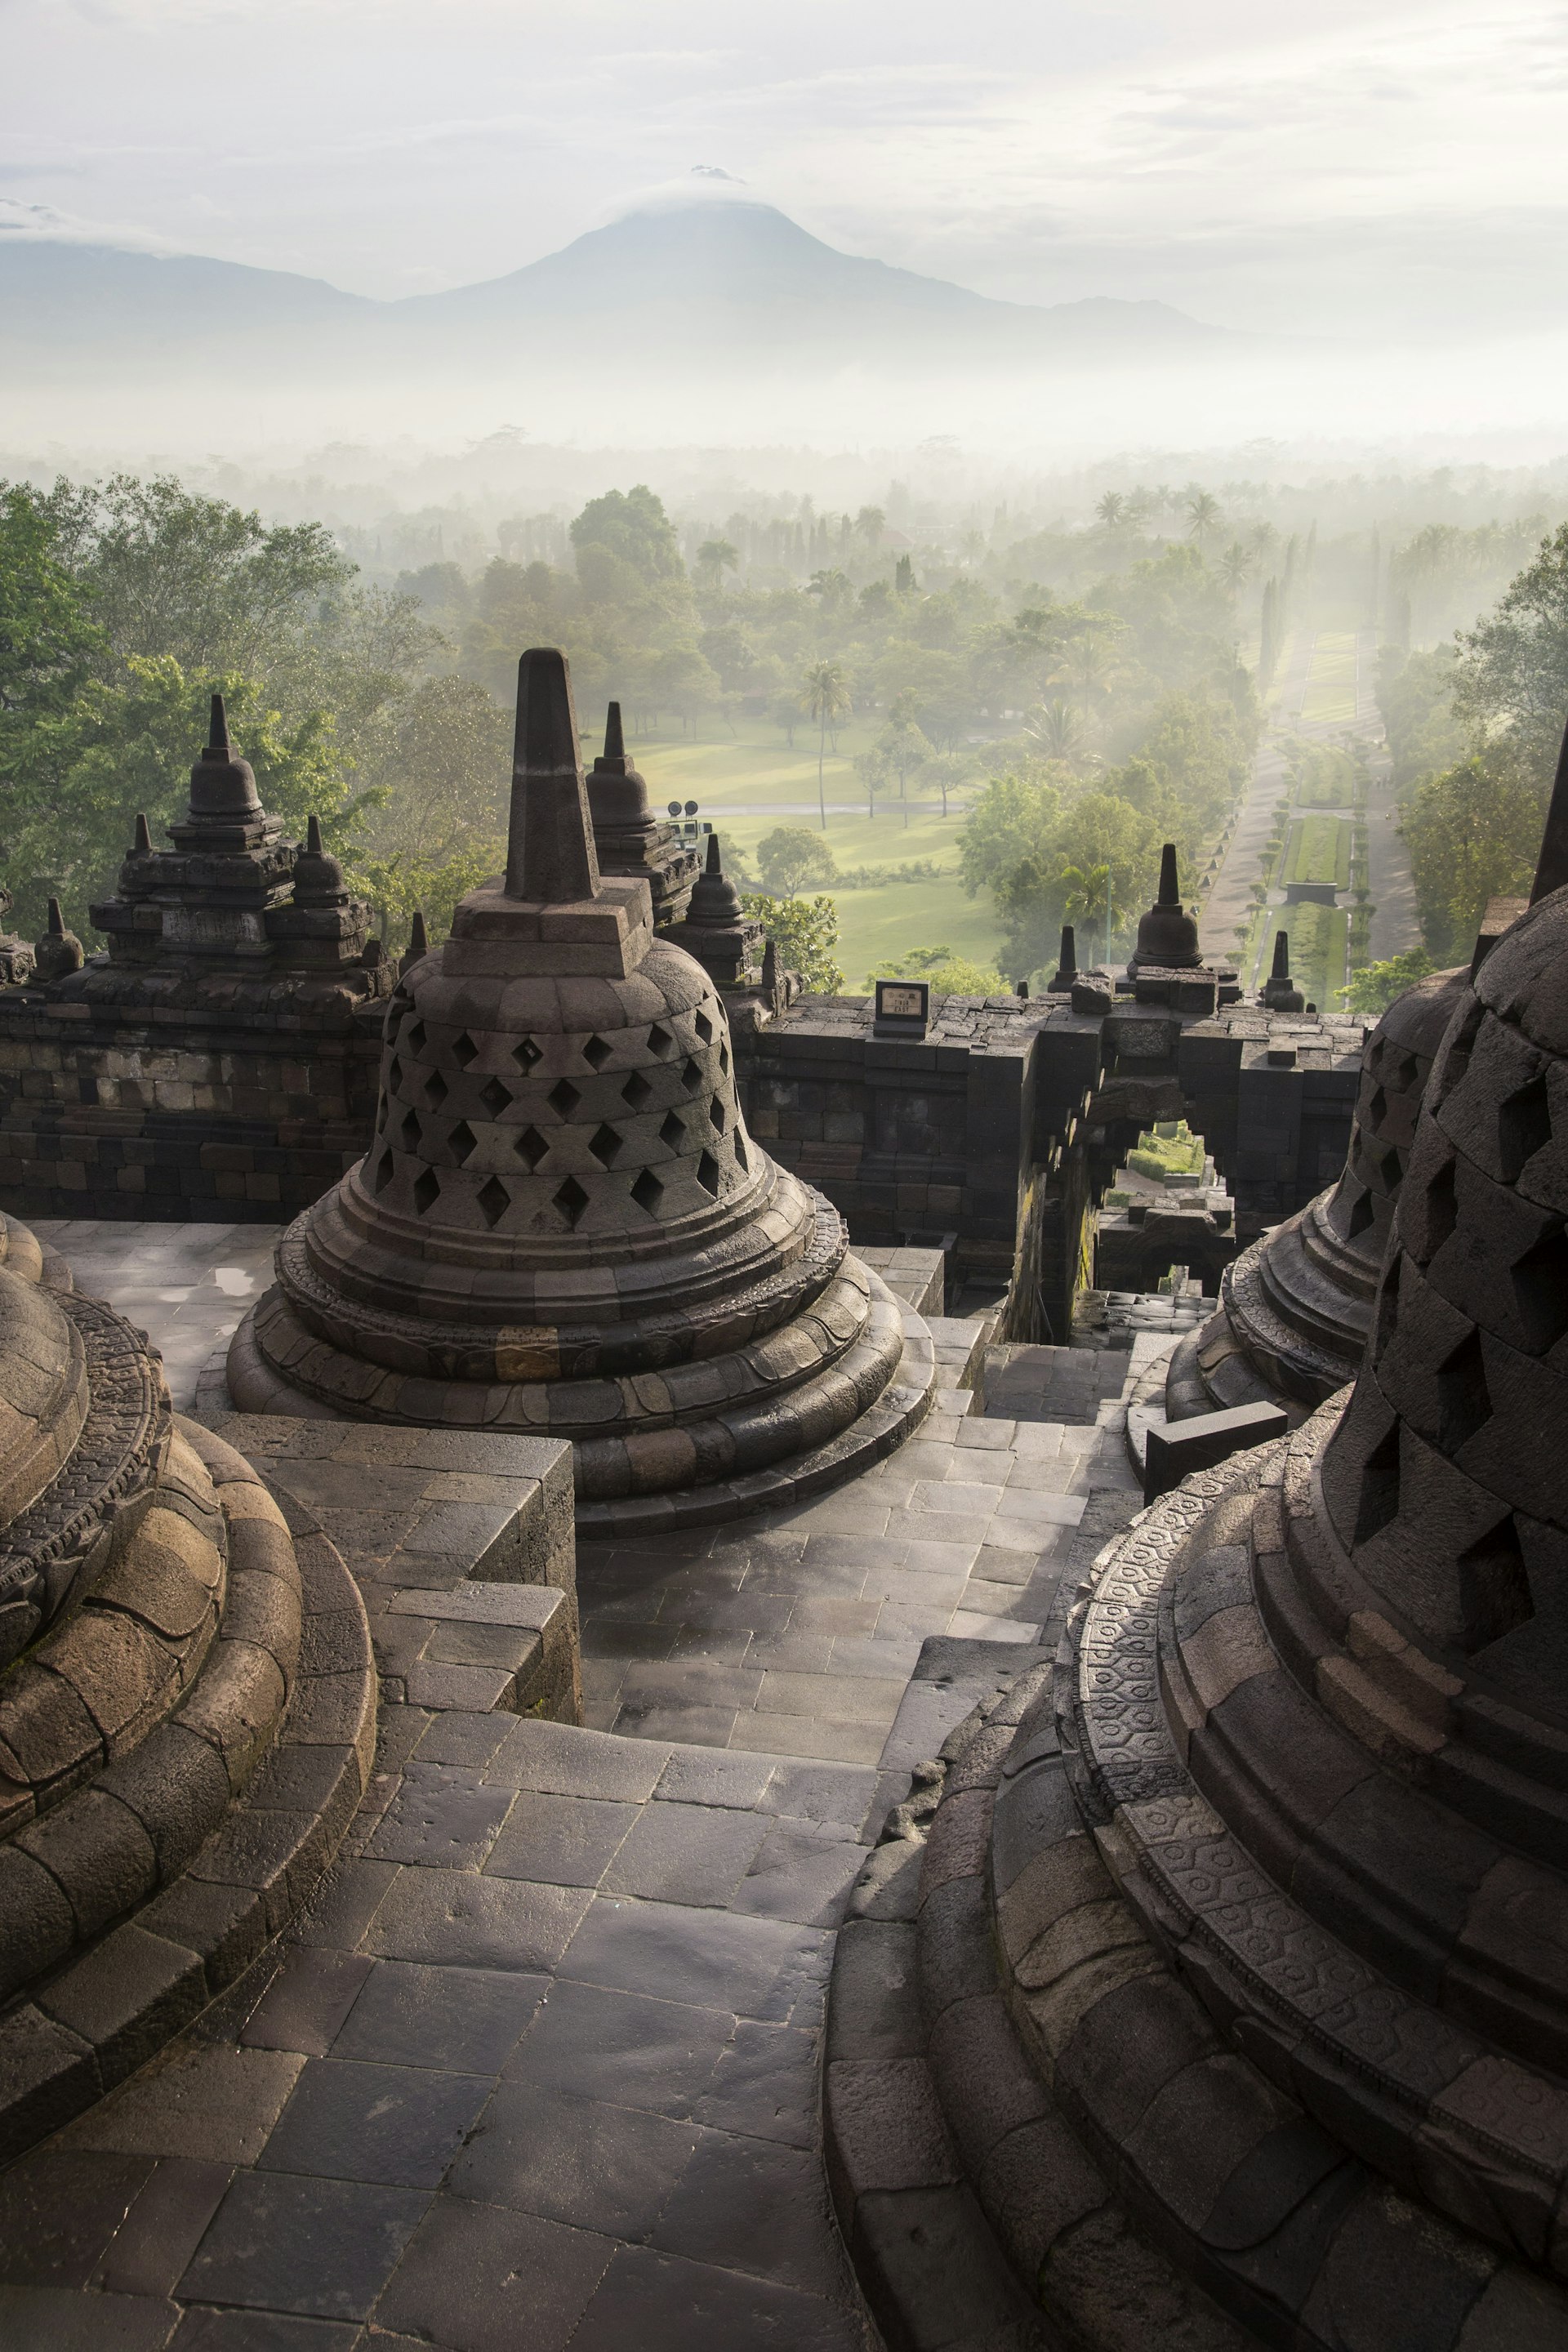 Stupas at the top of Borobudur, with the volcanic peak of Merapi above the morning mist in the background.